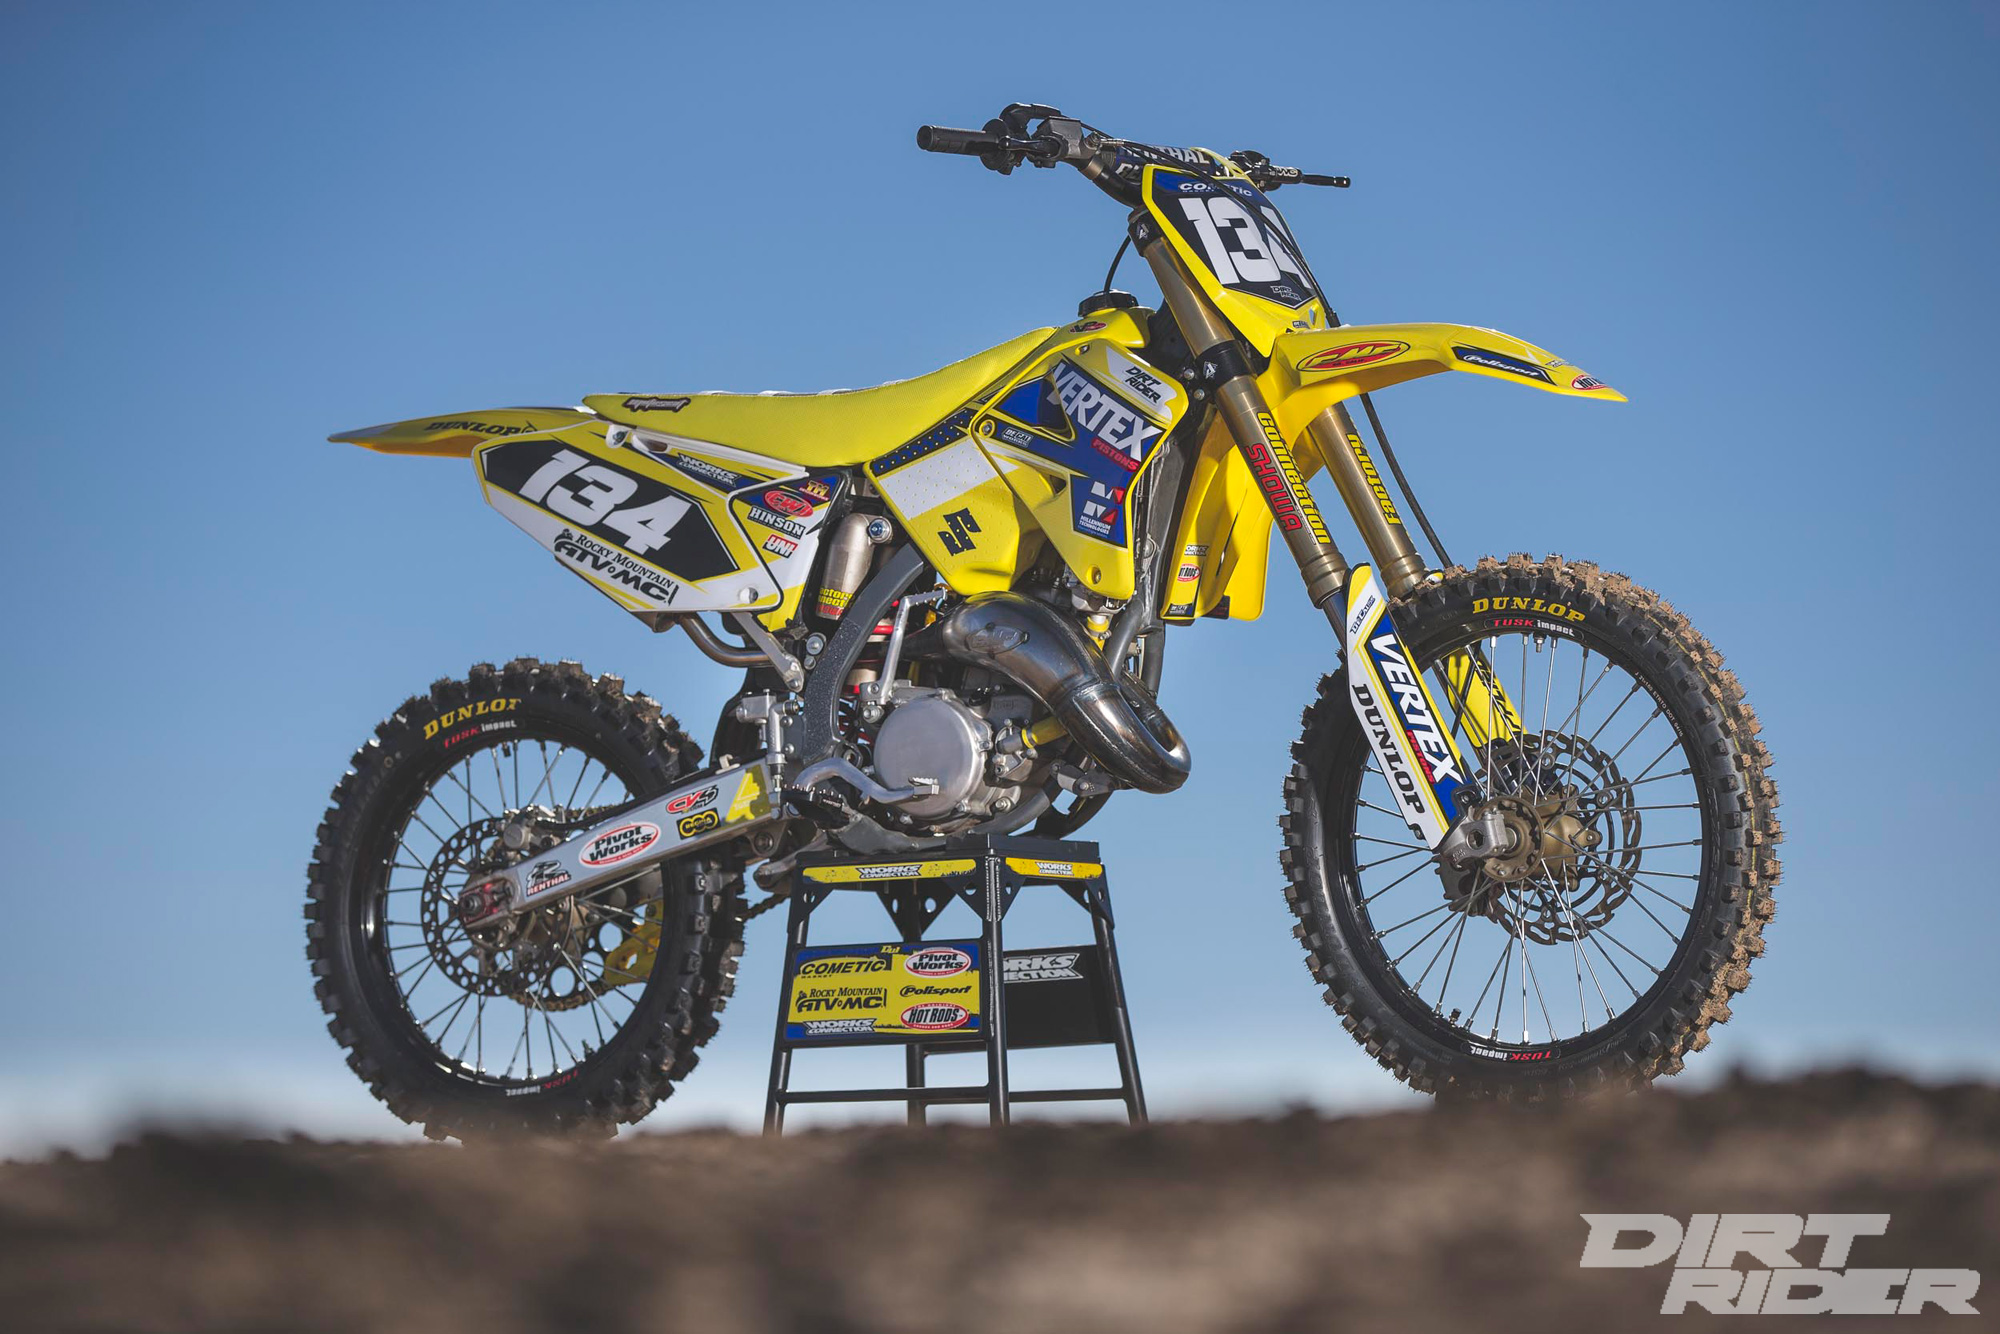 rangle frugthave linned 2006 Suzuki RM125 Project Bike Review | Dirt Rider